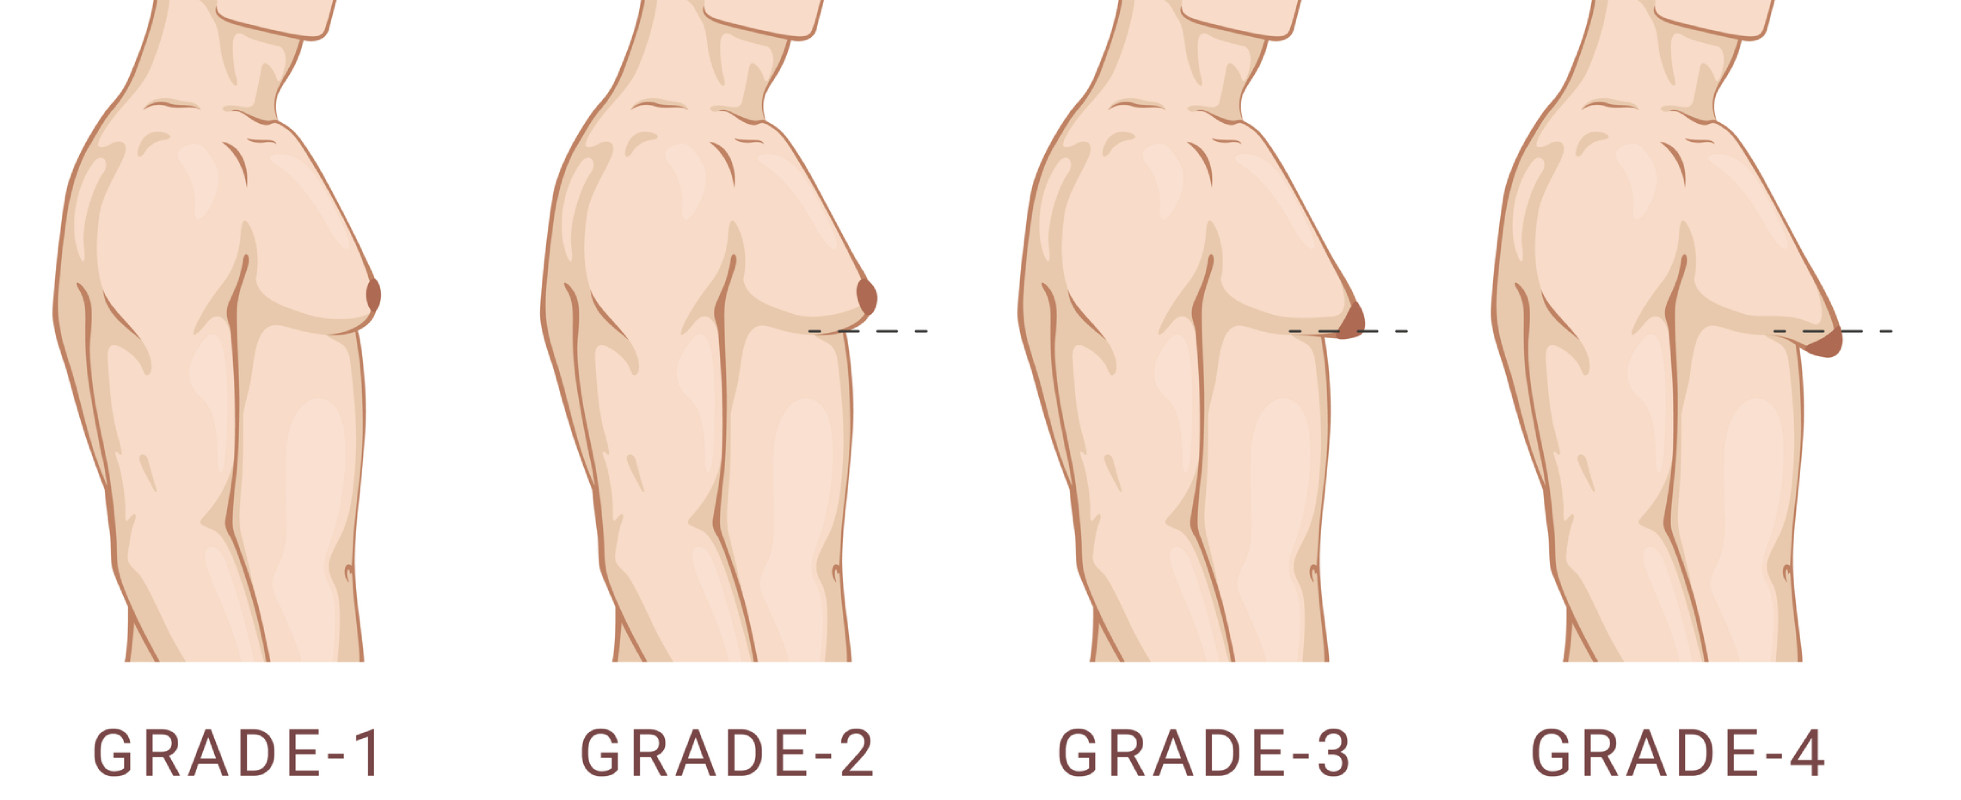 grades and stages of gynecomastia development